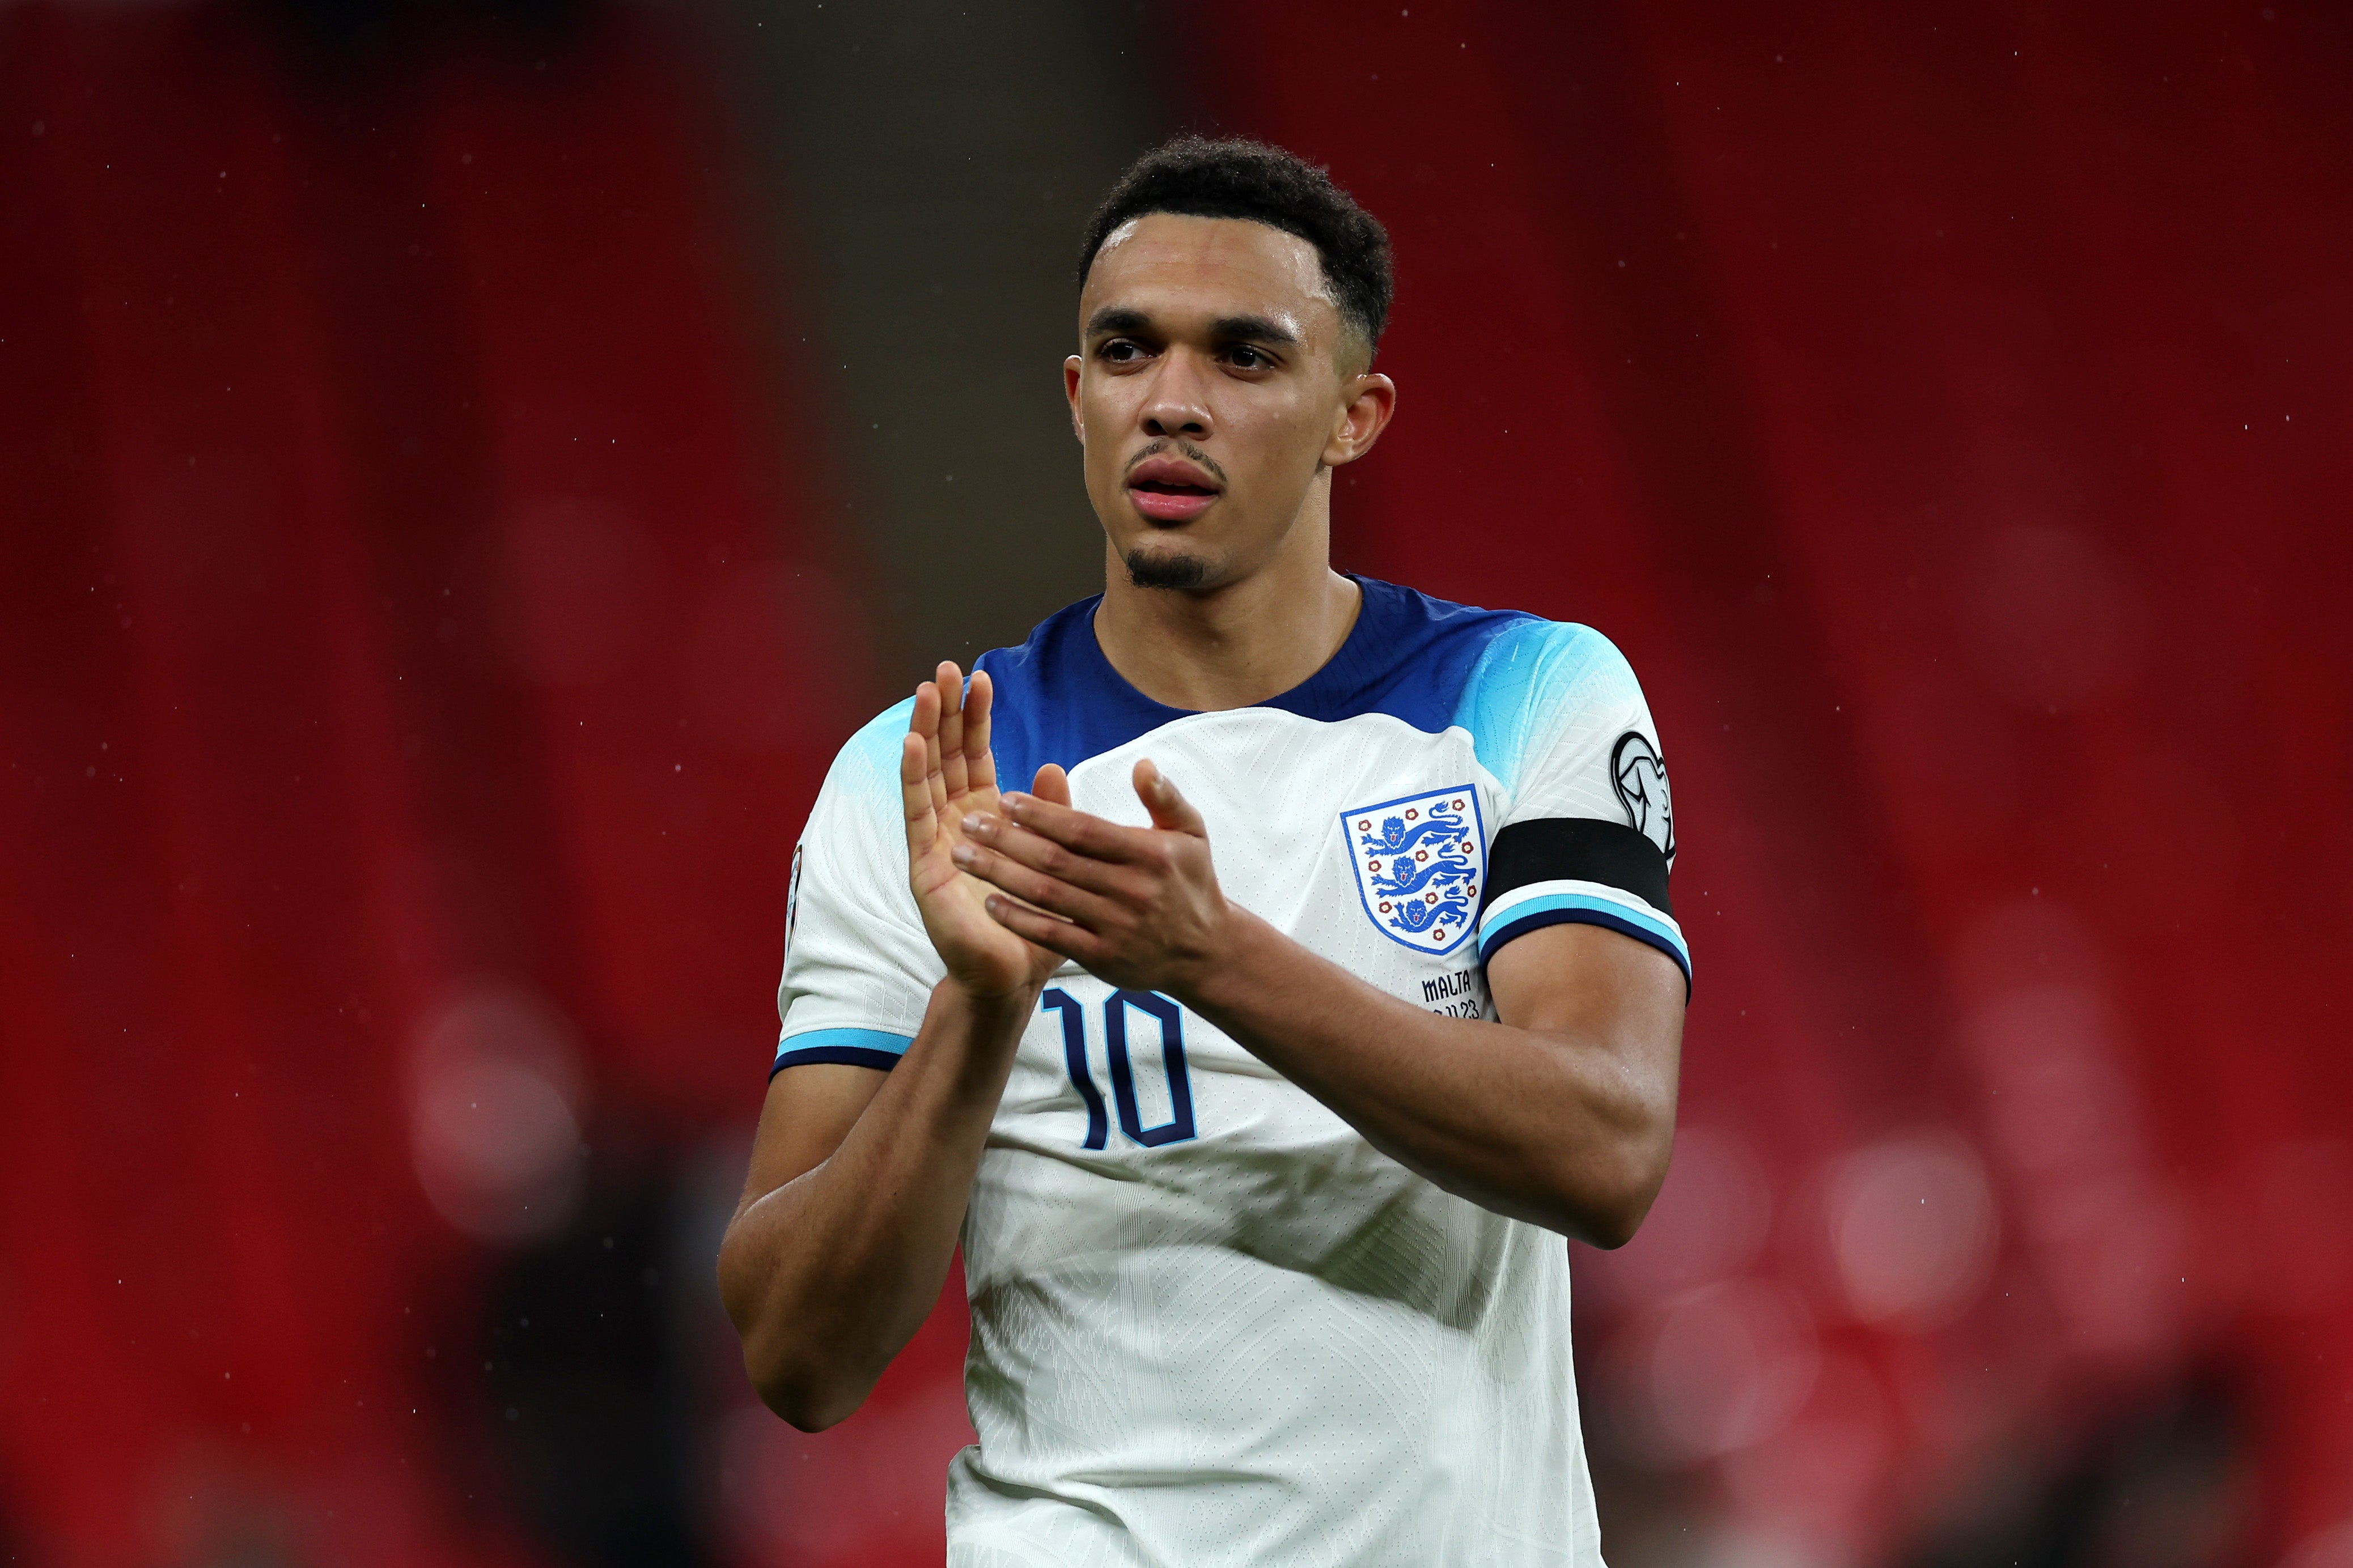 Alexander-Arnold was the last off the pitch after applauding the crowd